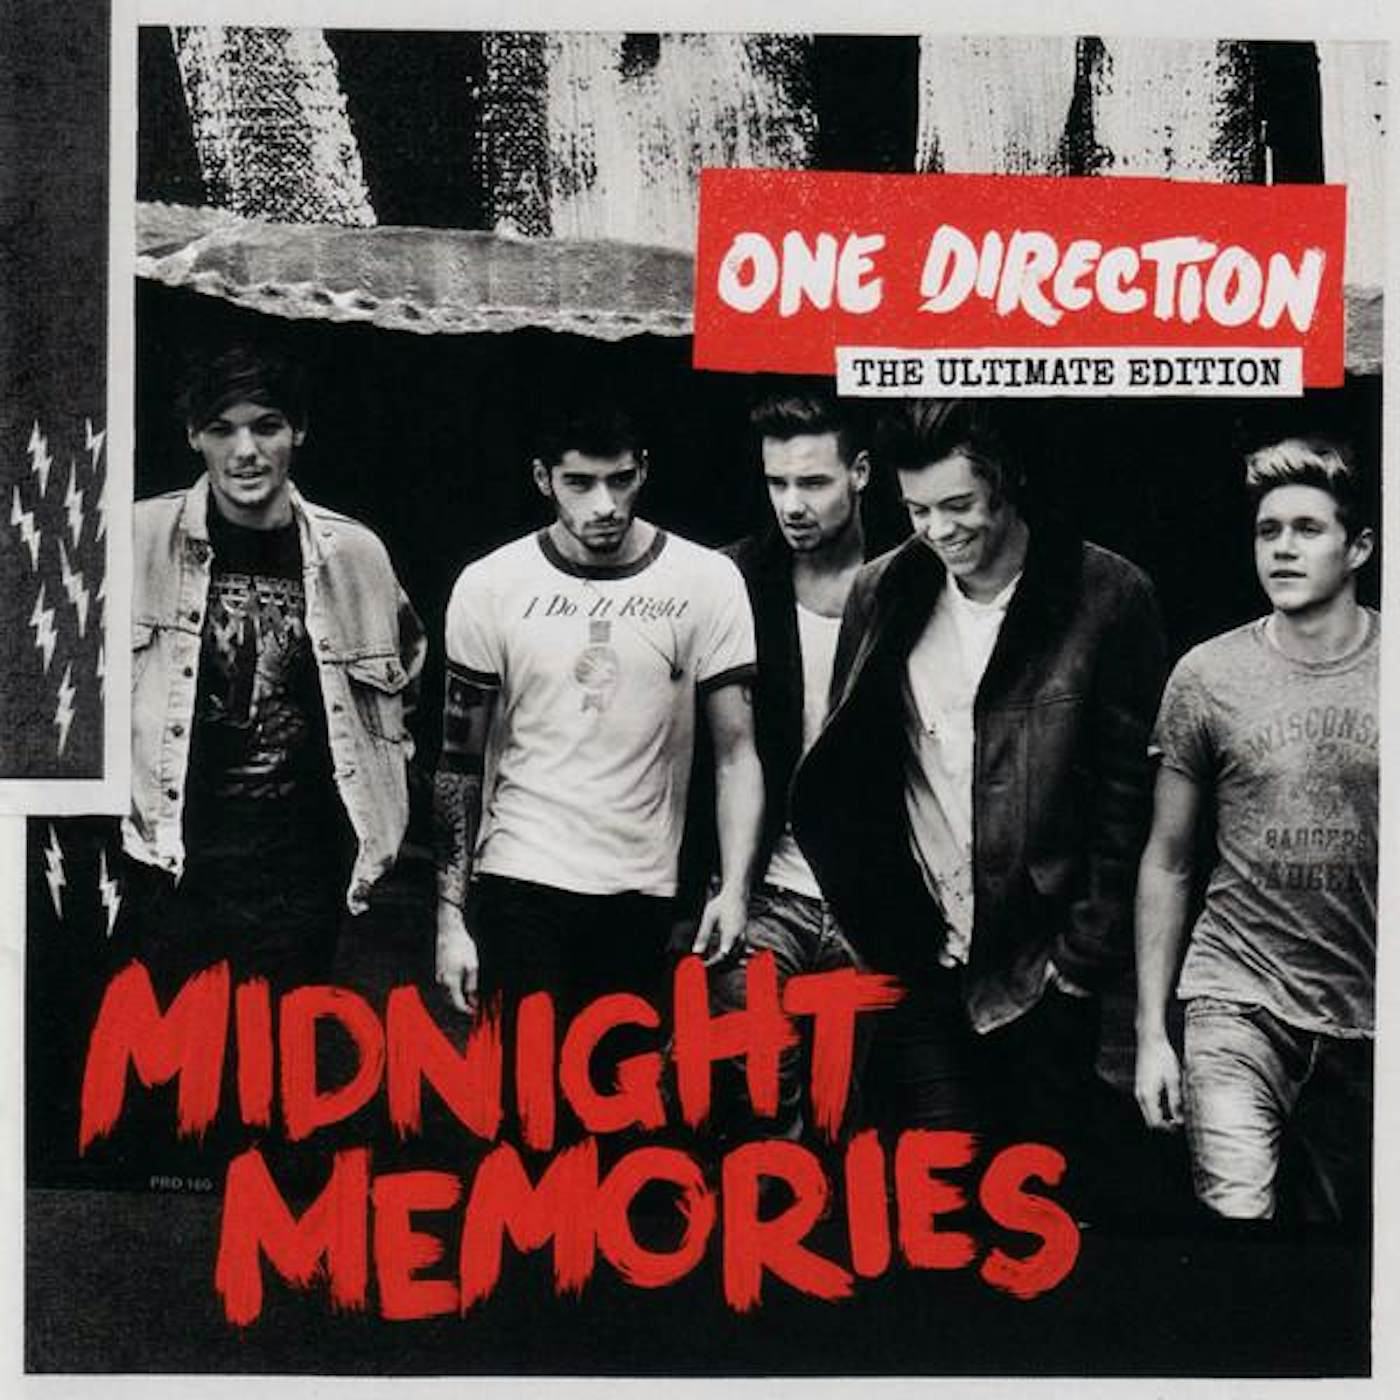 One Direction MIDNIGHT MEMORIES DELUXE (GOLD SERIES) CD